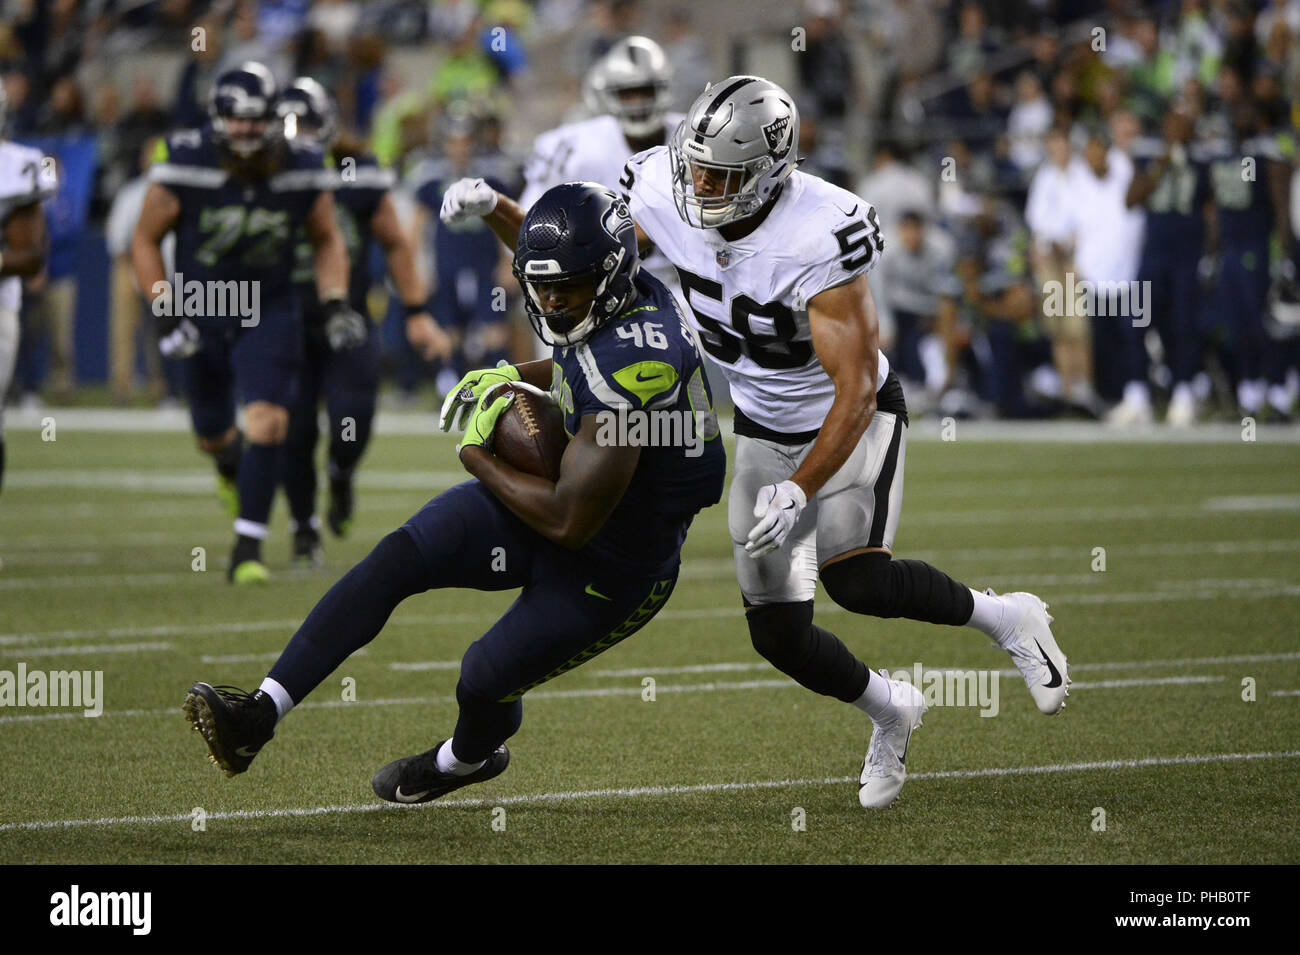 Seattle, Washington, USA. 30th Aug, 2018. Seattle tightend TYRON SWOOPES (46) grabs one of his two passes against linebacker KYLE WILBER (58) as the Oakland Raiders play the Seattle Seahawks in a preseason NFL game at Century Link Field in Seattle, WA. Credit: Jeff Halstead/ZUMA Wire/Alamy Live News Stock Photo